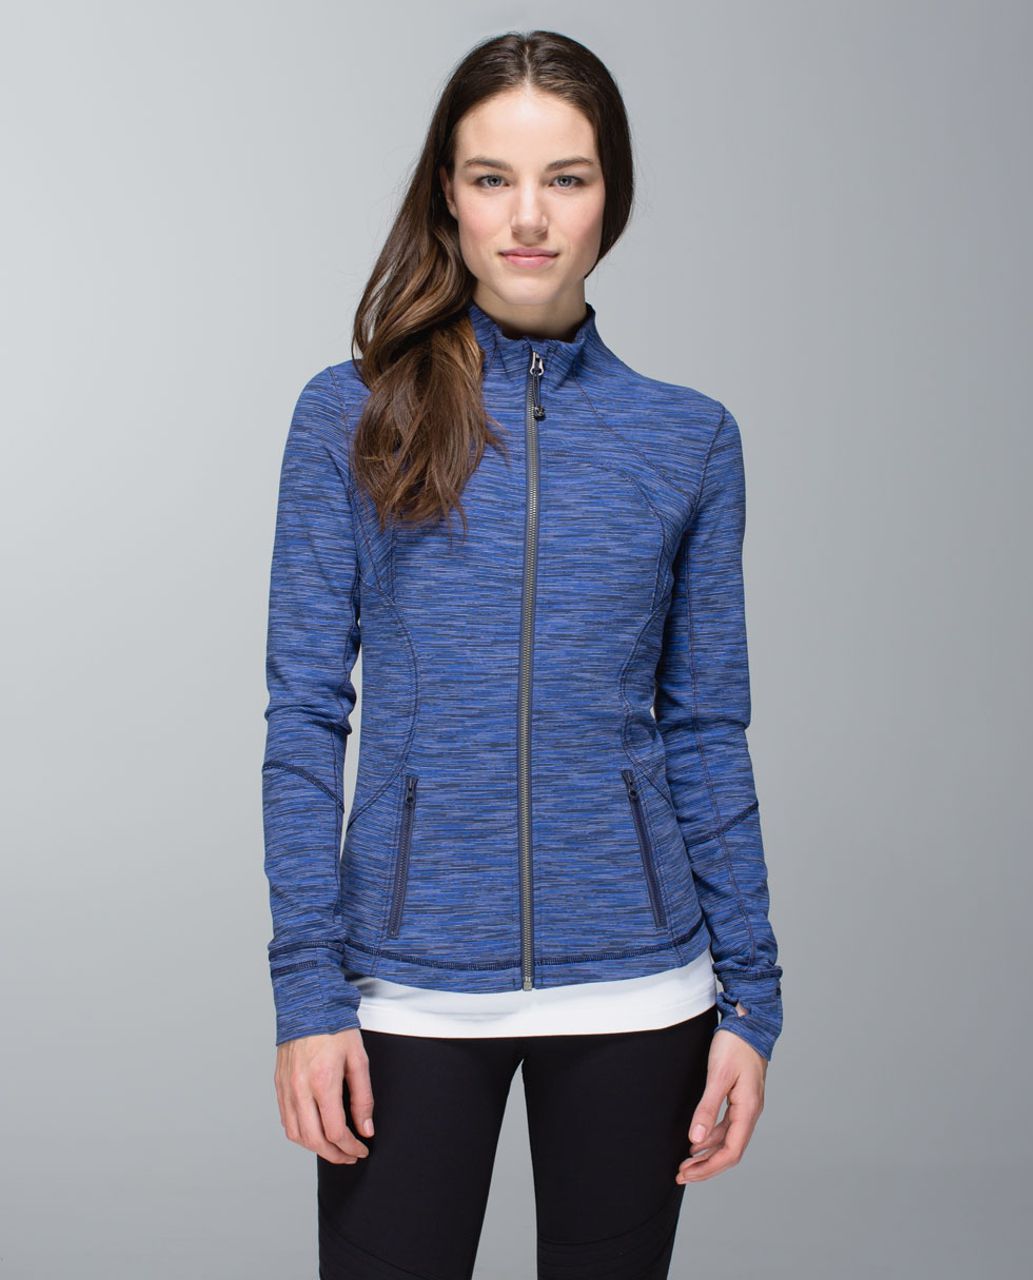 Lululemon Forme Jacket *Cuffins - Wee Are From Space Cadet Blue - lulu ...